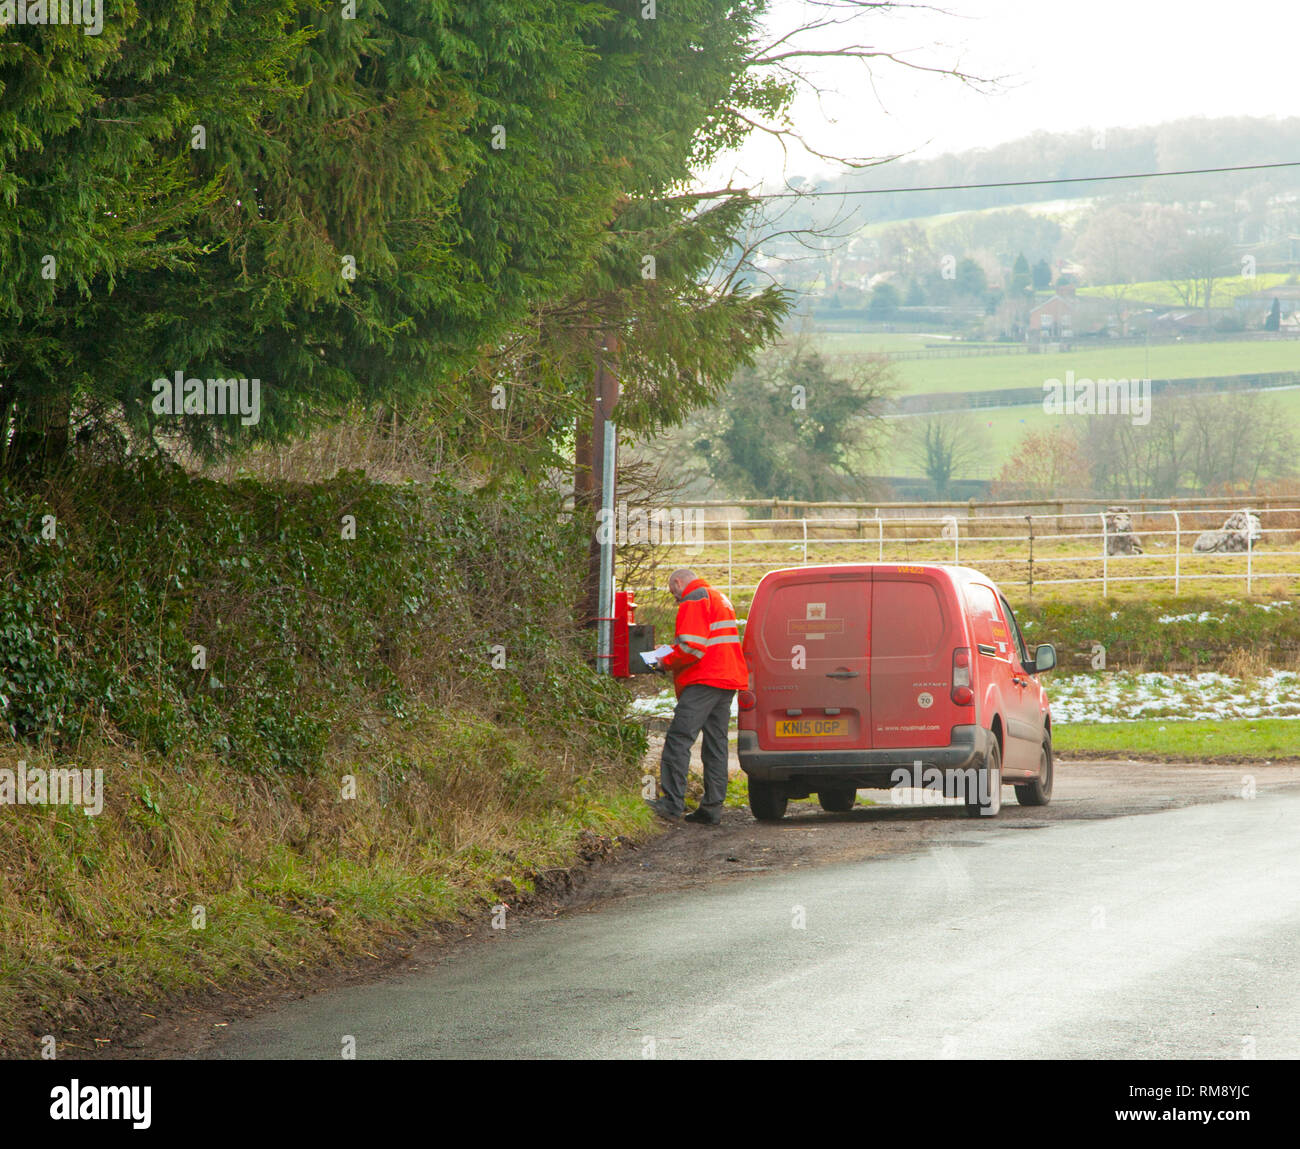 Postman wearing  high vis jacket in post van making a Rural letter collection from a post box in Cheshire countryside Stock Photo